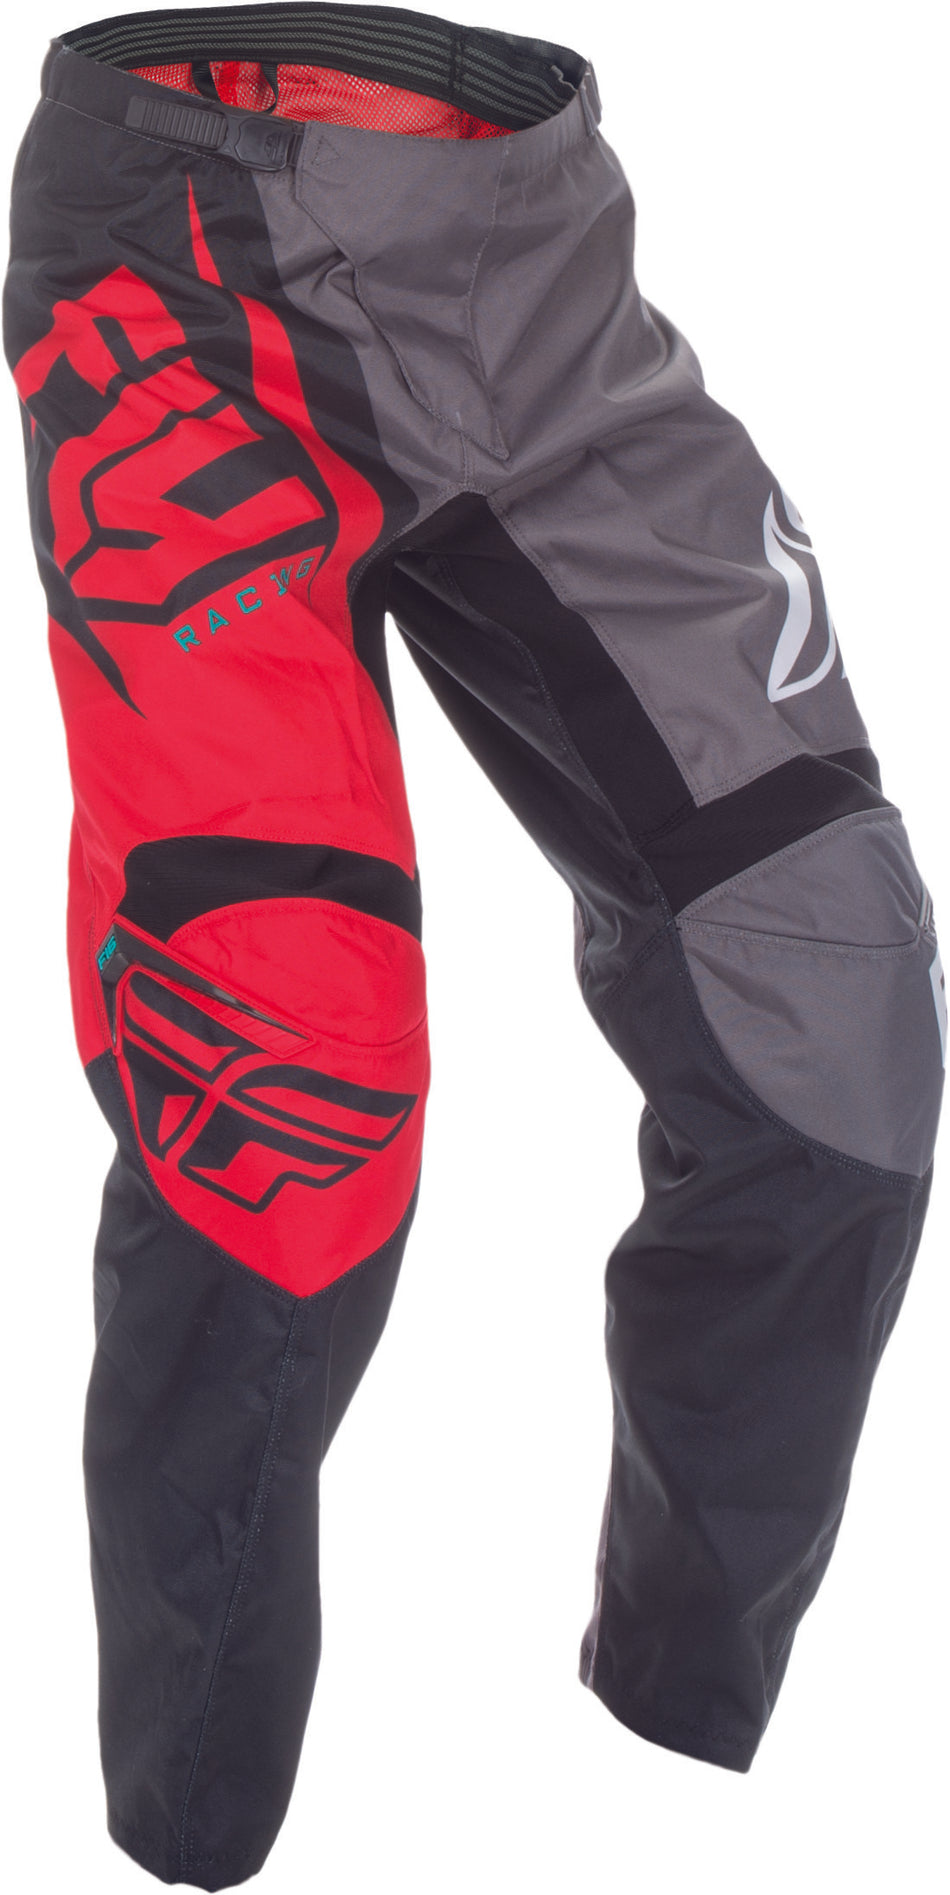 FLY RACING F-16 Pant Red/Black/Grey Sz 20 370-93220